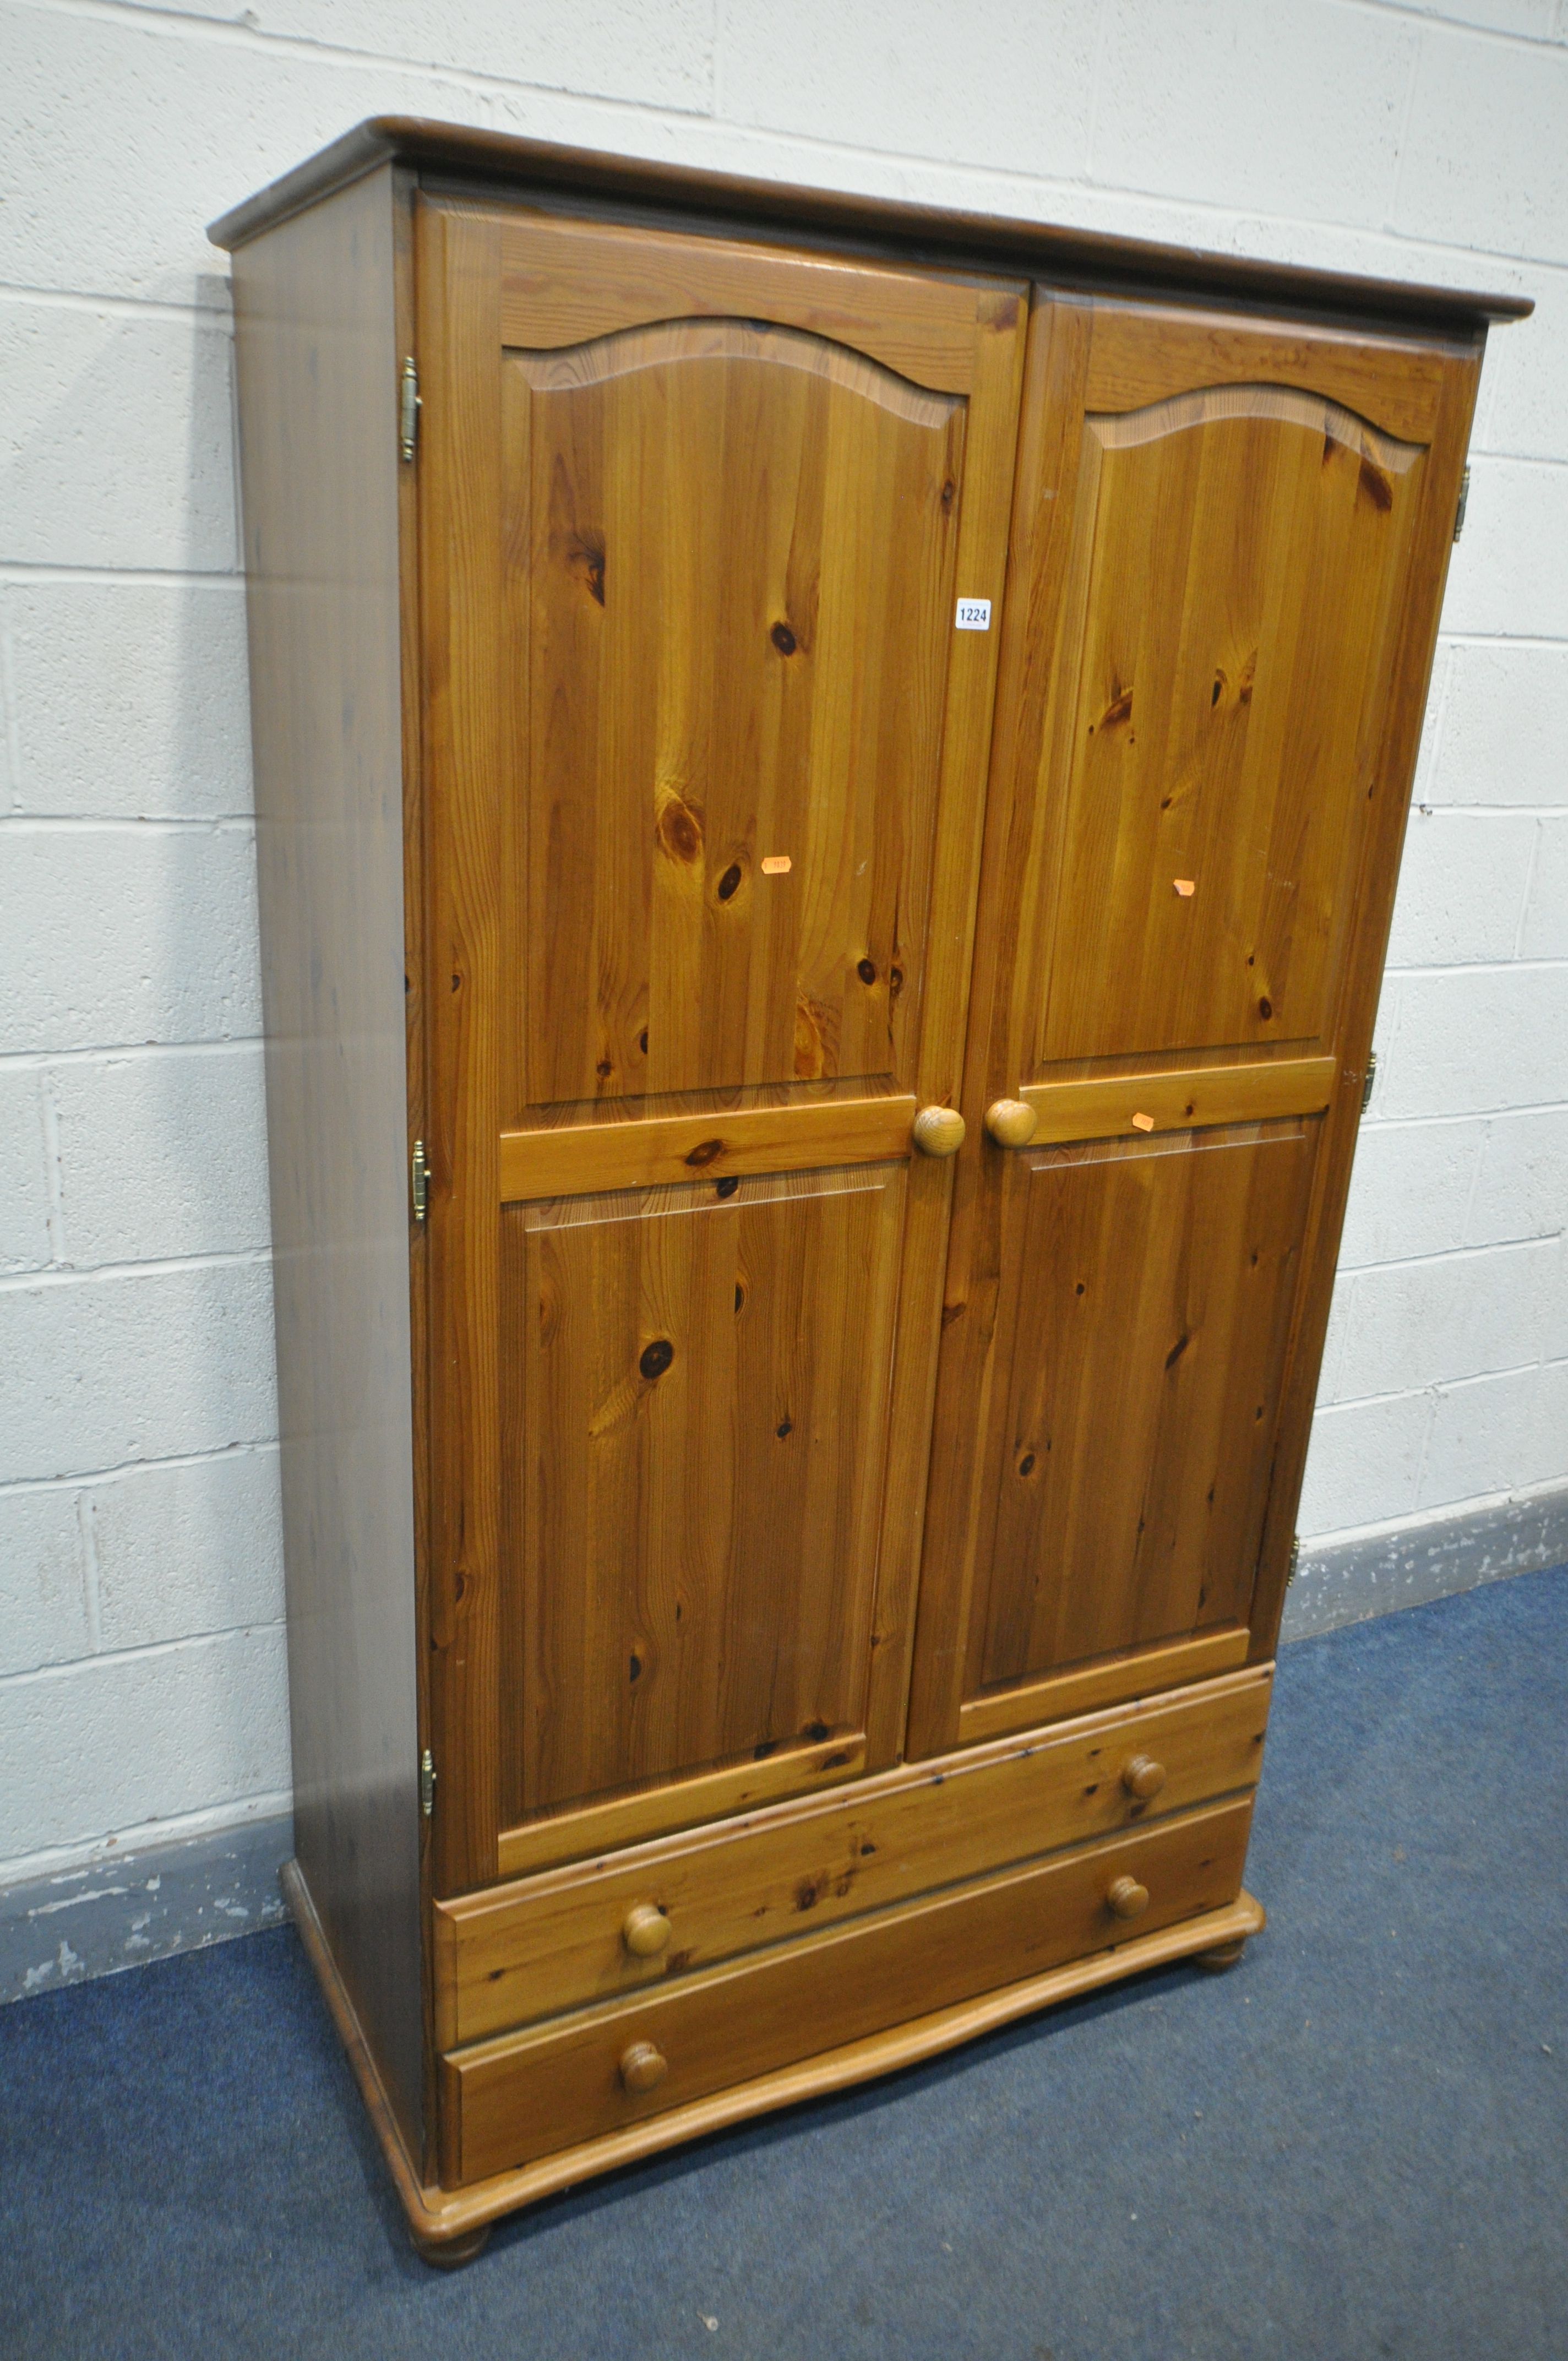 A MODERN PINE DOUBLE DOOR WARDROBE, with two drawers, width 104cm x depth 56cm x height 182cm